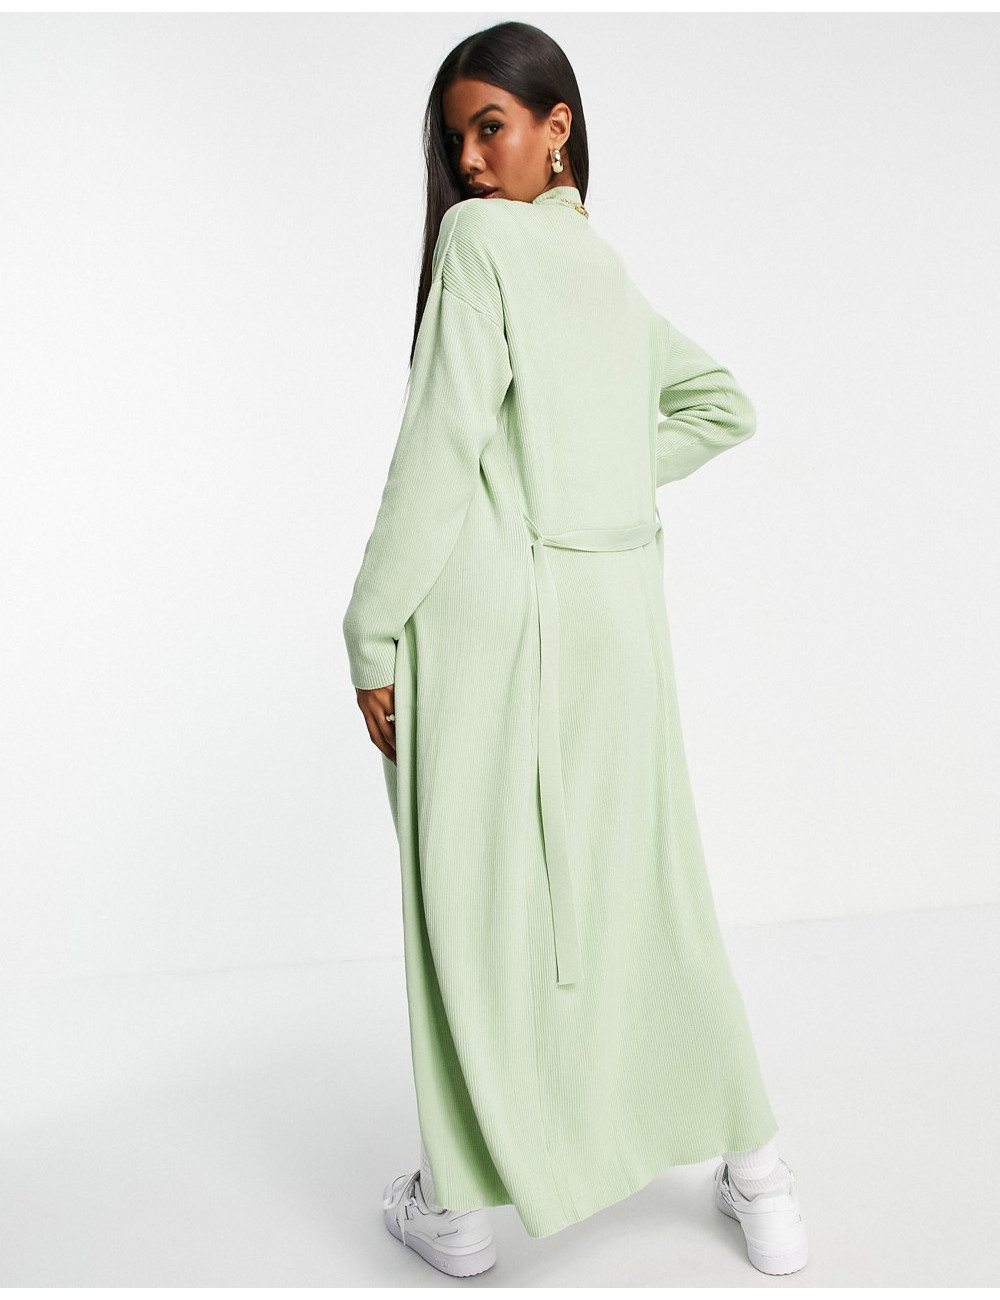 Missguided co-ord maxi...